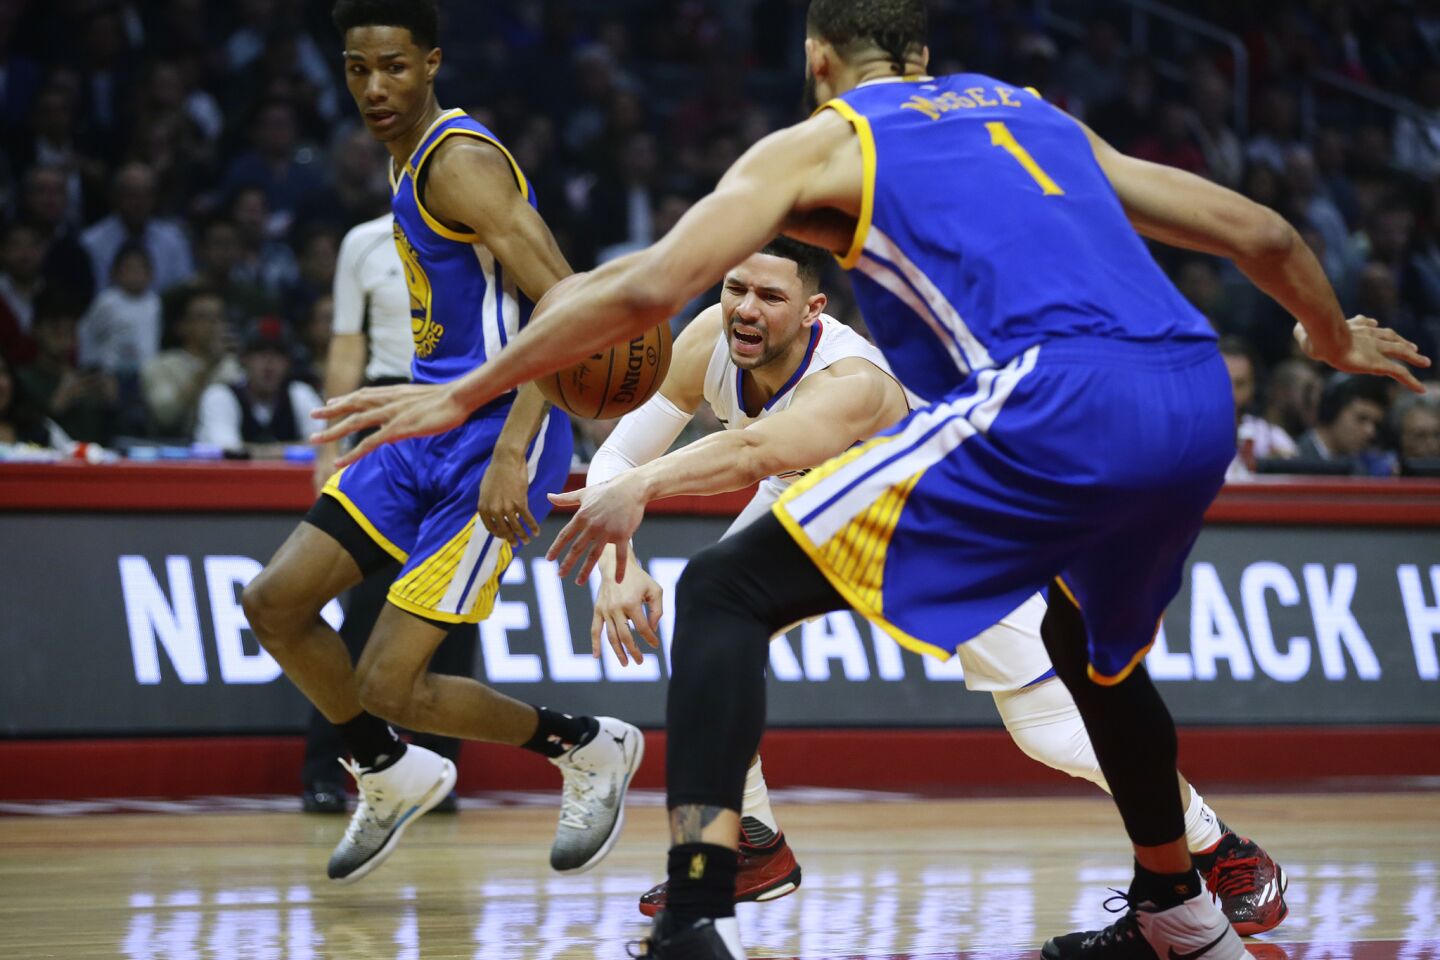 Clippers guard Austin Rivers loses control of the ball while driving against the Warriors during the first half.